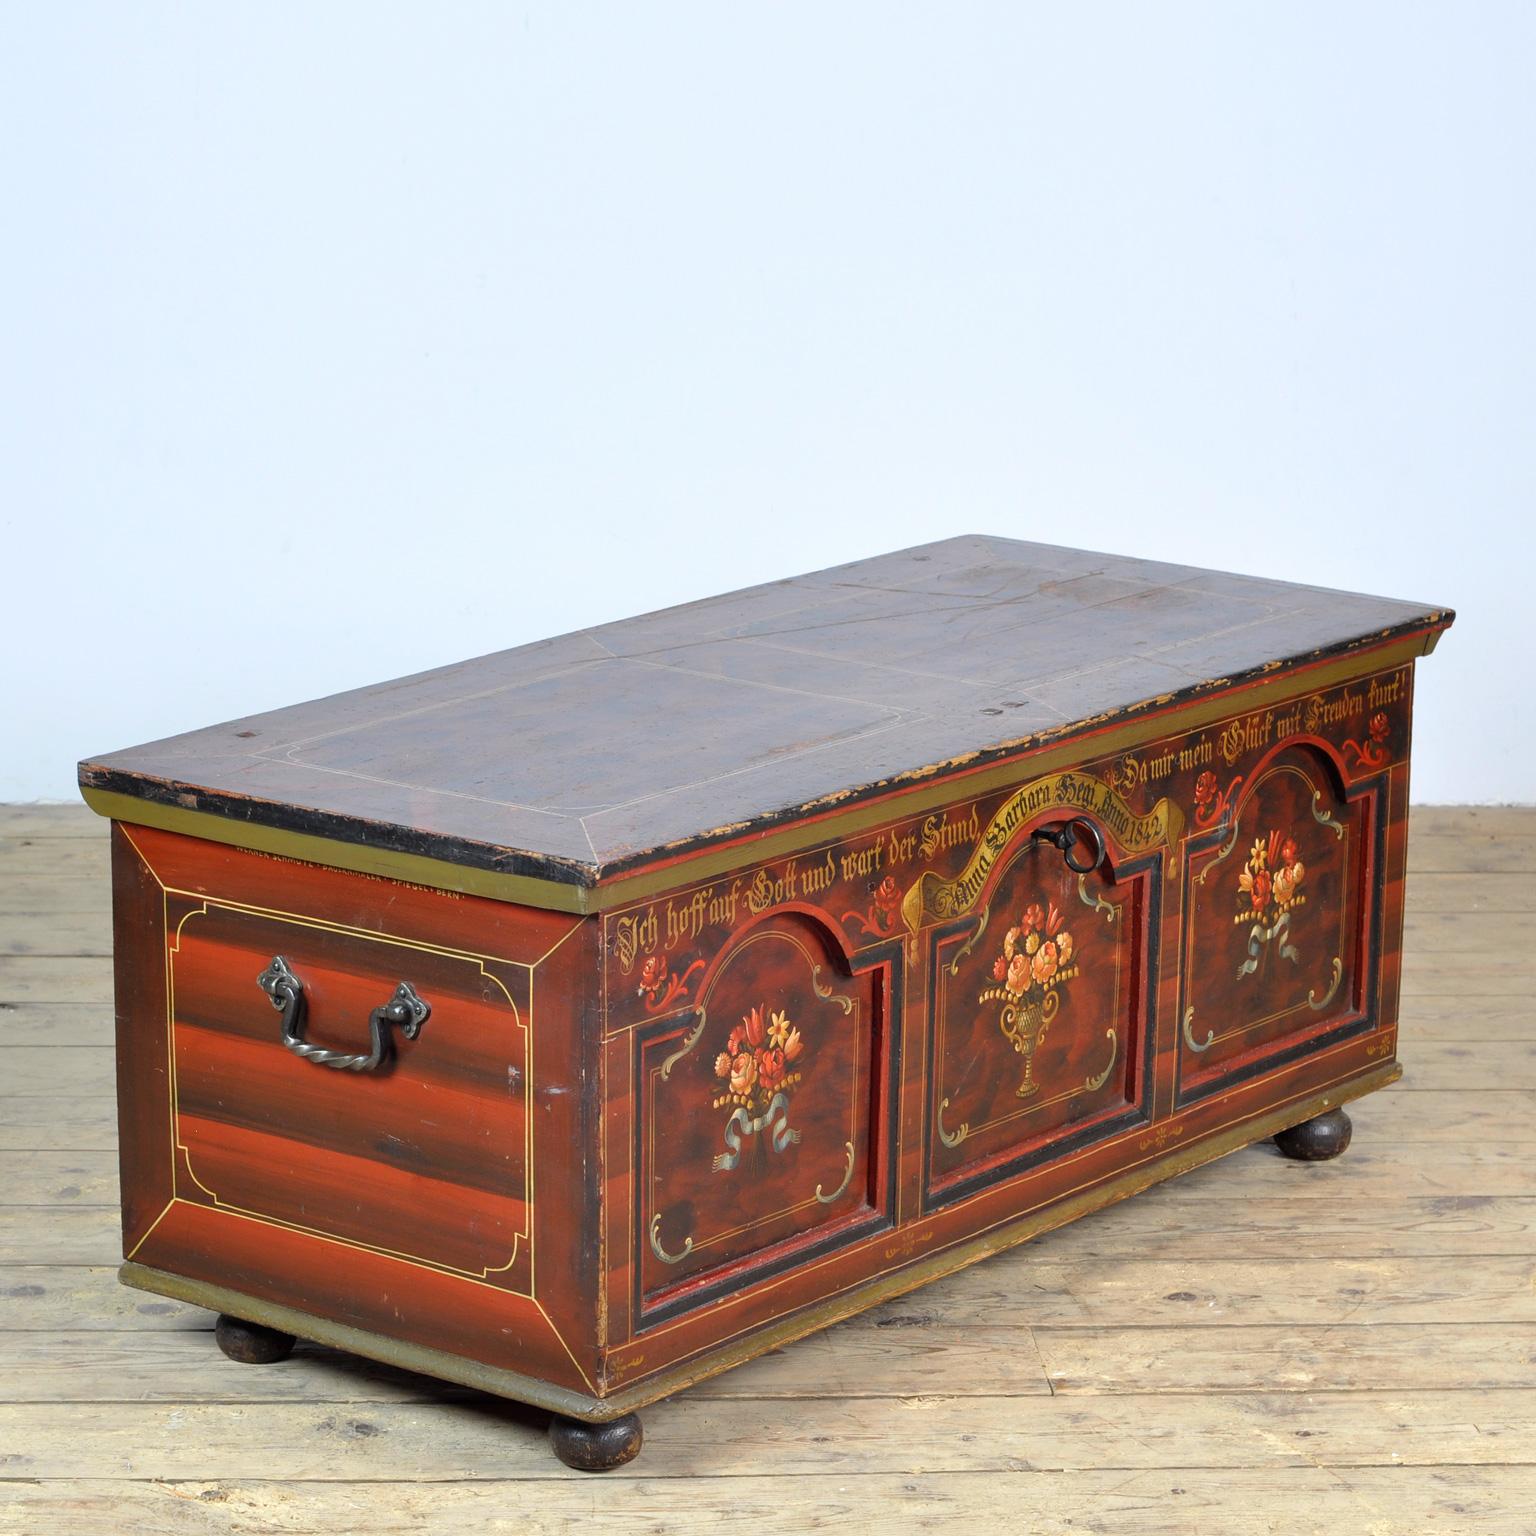 Rustic German Pine Wedding Chest from 1842